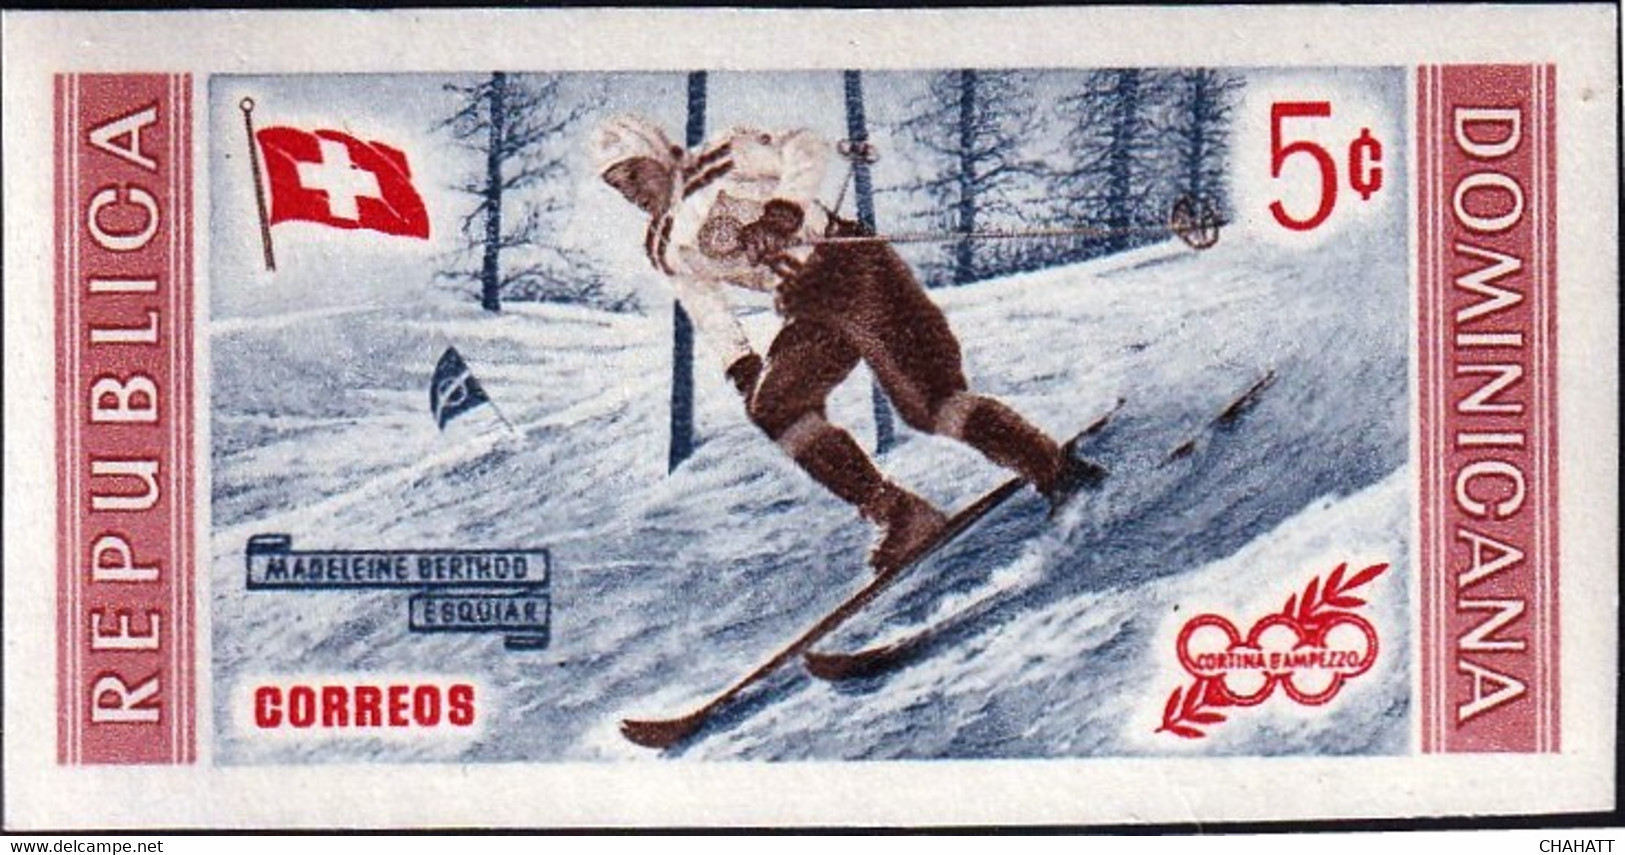 WINTER OLYMPICS-1956-SKIING-PERF & IMPERF-DOMINICANA-MNH-A4-535 - Hiver 1956: Cortina D'Ampezzo